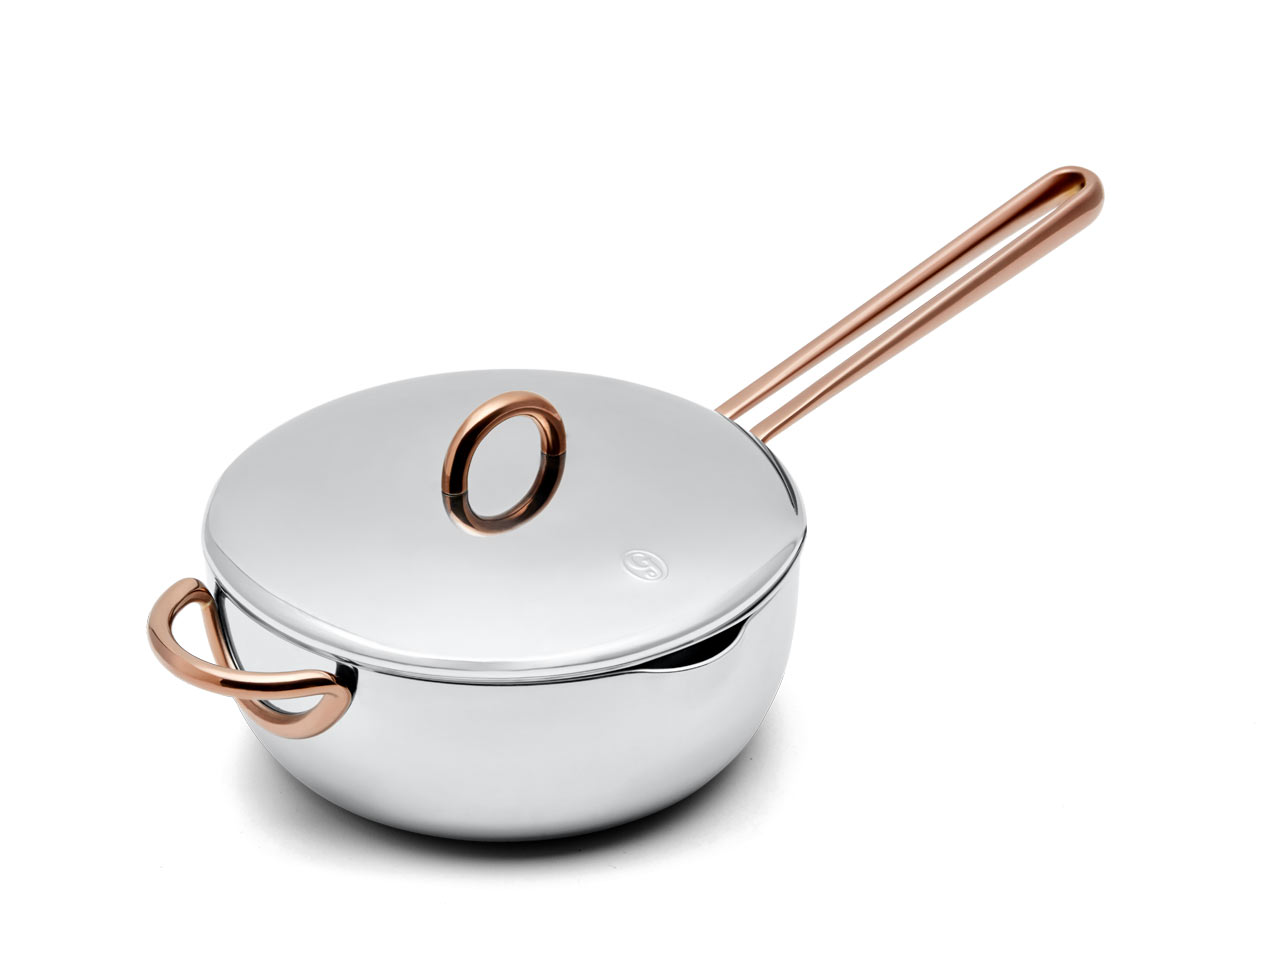 Great Jones Cookware Will Make You Fall in Love with Cooking